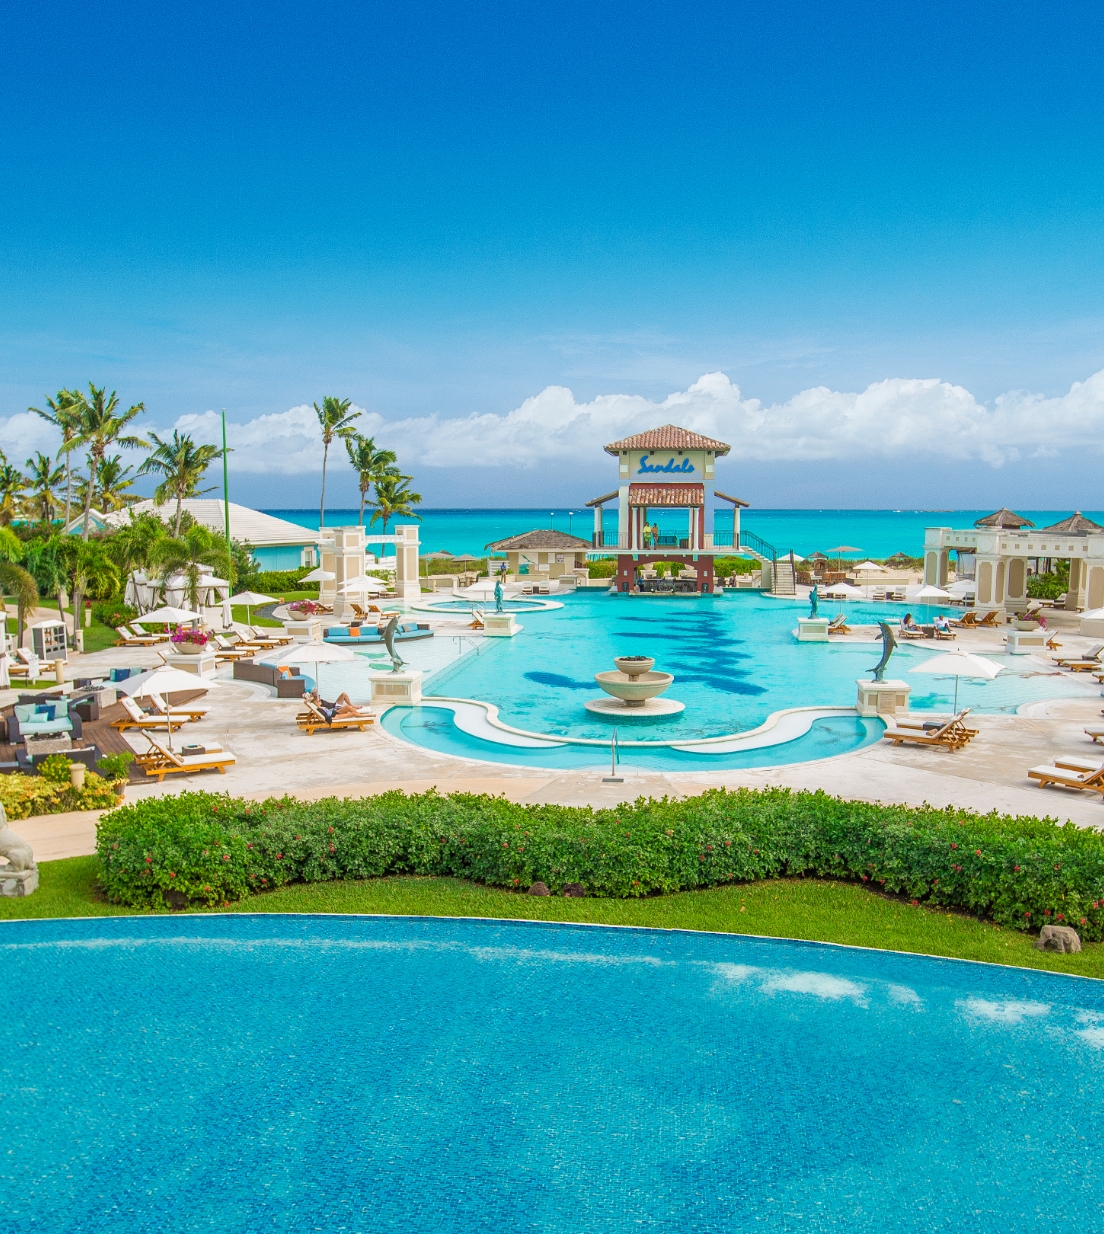 FULL REVIEW What Guests Love About Sandals Emerald Bay